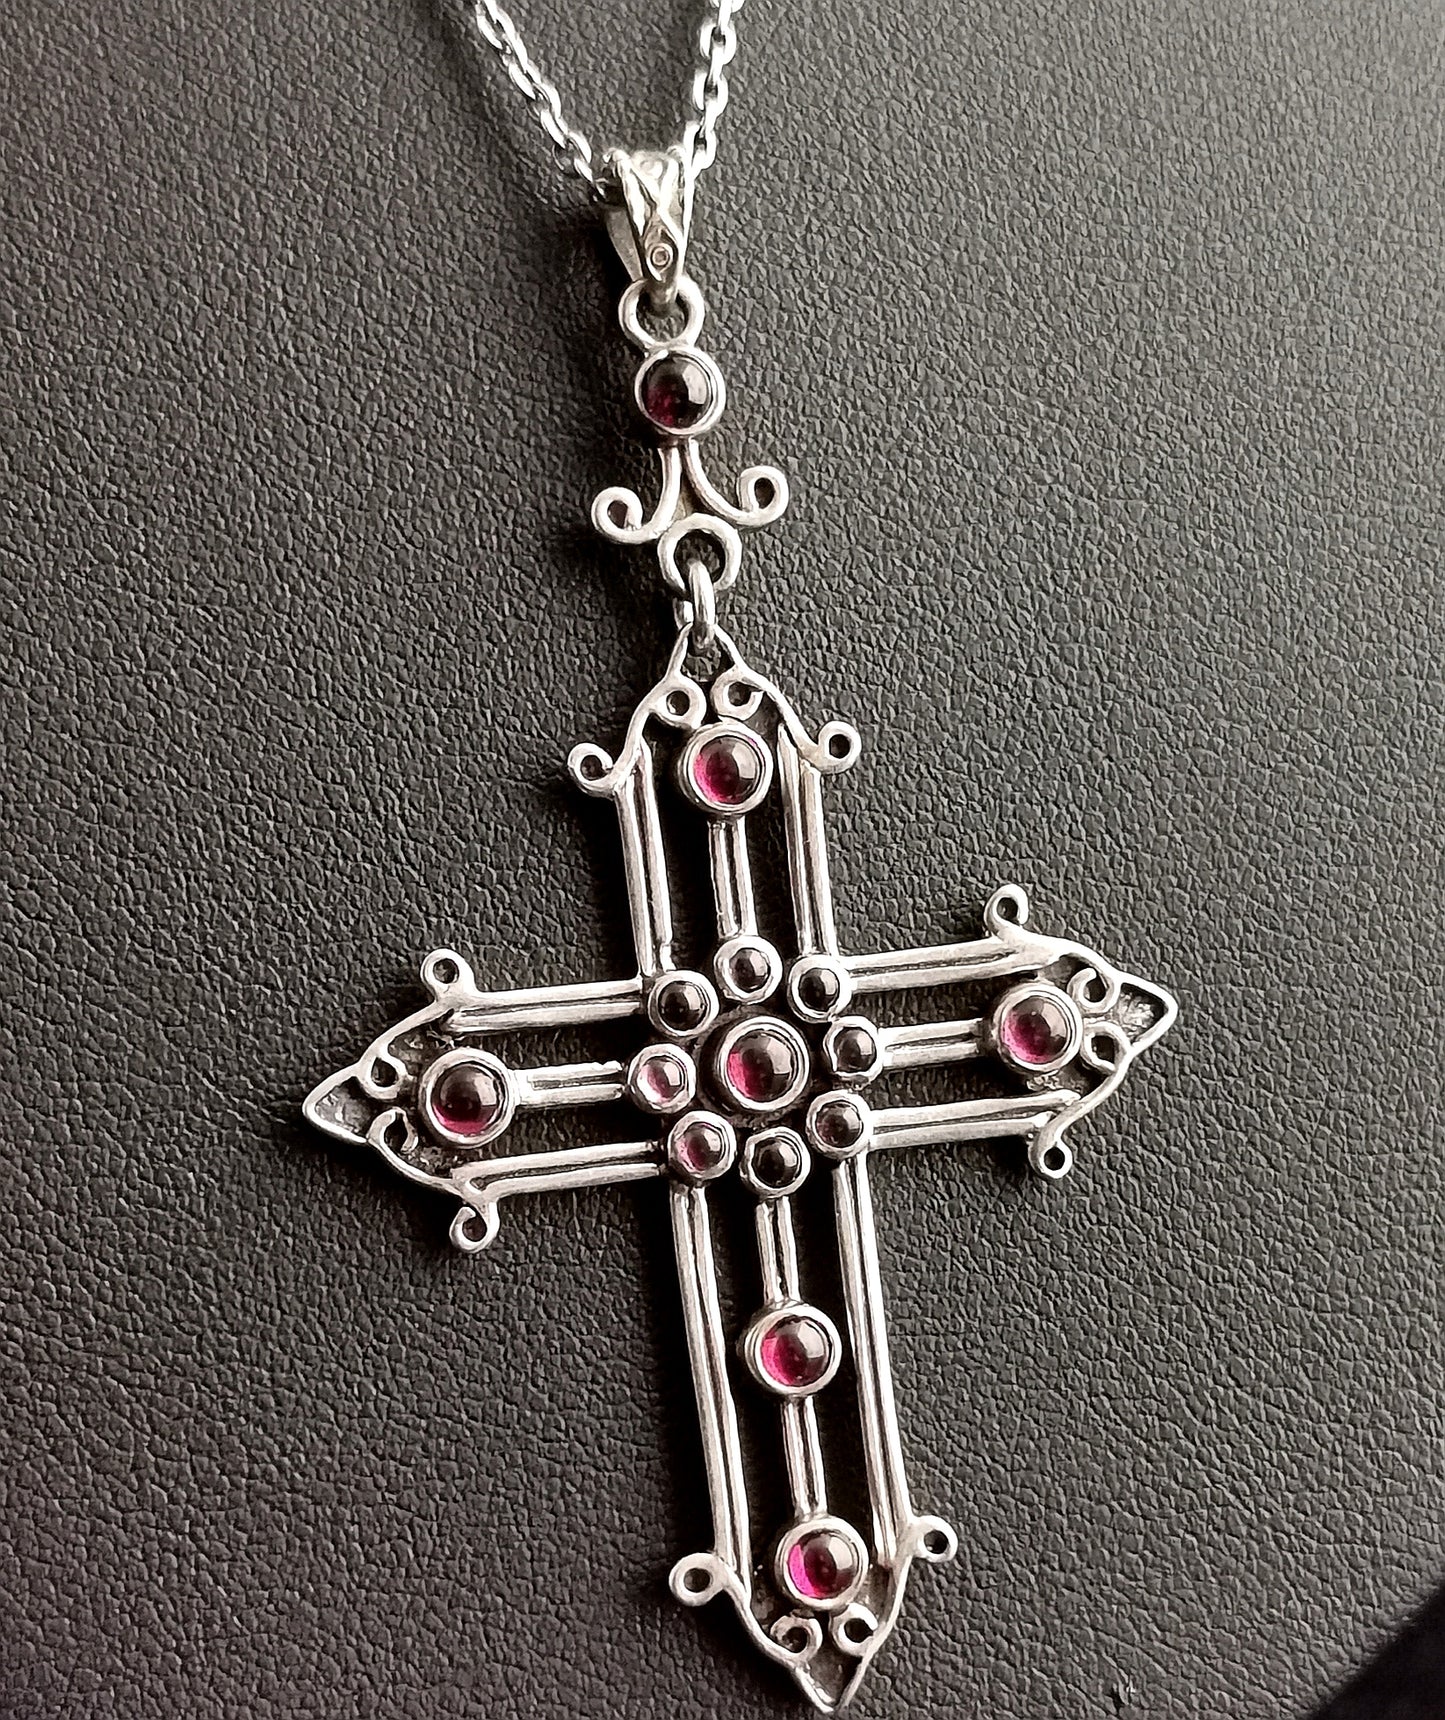 Vintage silver and paste Cross pendant, necklace